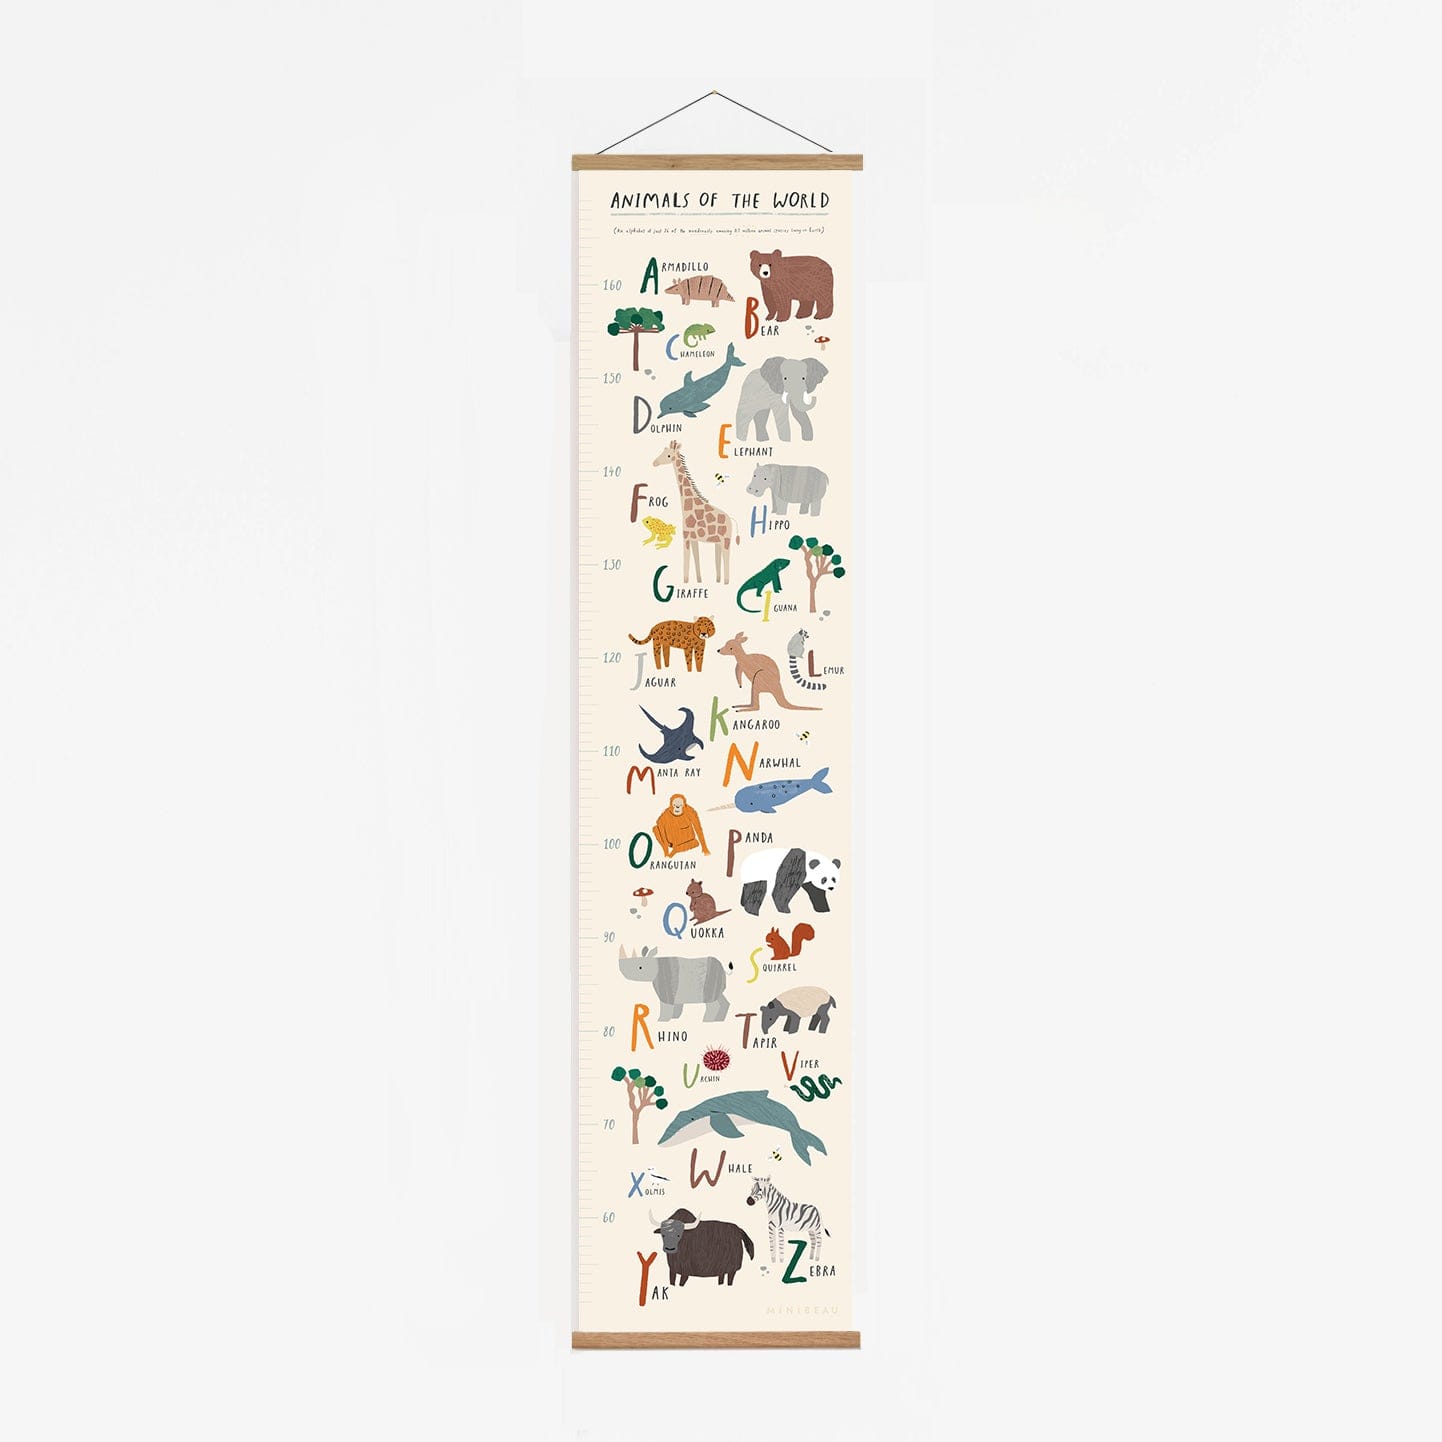 Our animals of the world height chart with solid oak hanger consists of pictures of animals from around the world representing each letter of the alphabet, including a panda, kangaroo, viper and chameleon. Has text at the top saying animals of the world in large font and the text - An alphabet of just 26 of the wondrously, amazing 8.7 million animal species living on earth in brackets as a sub heading.